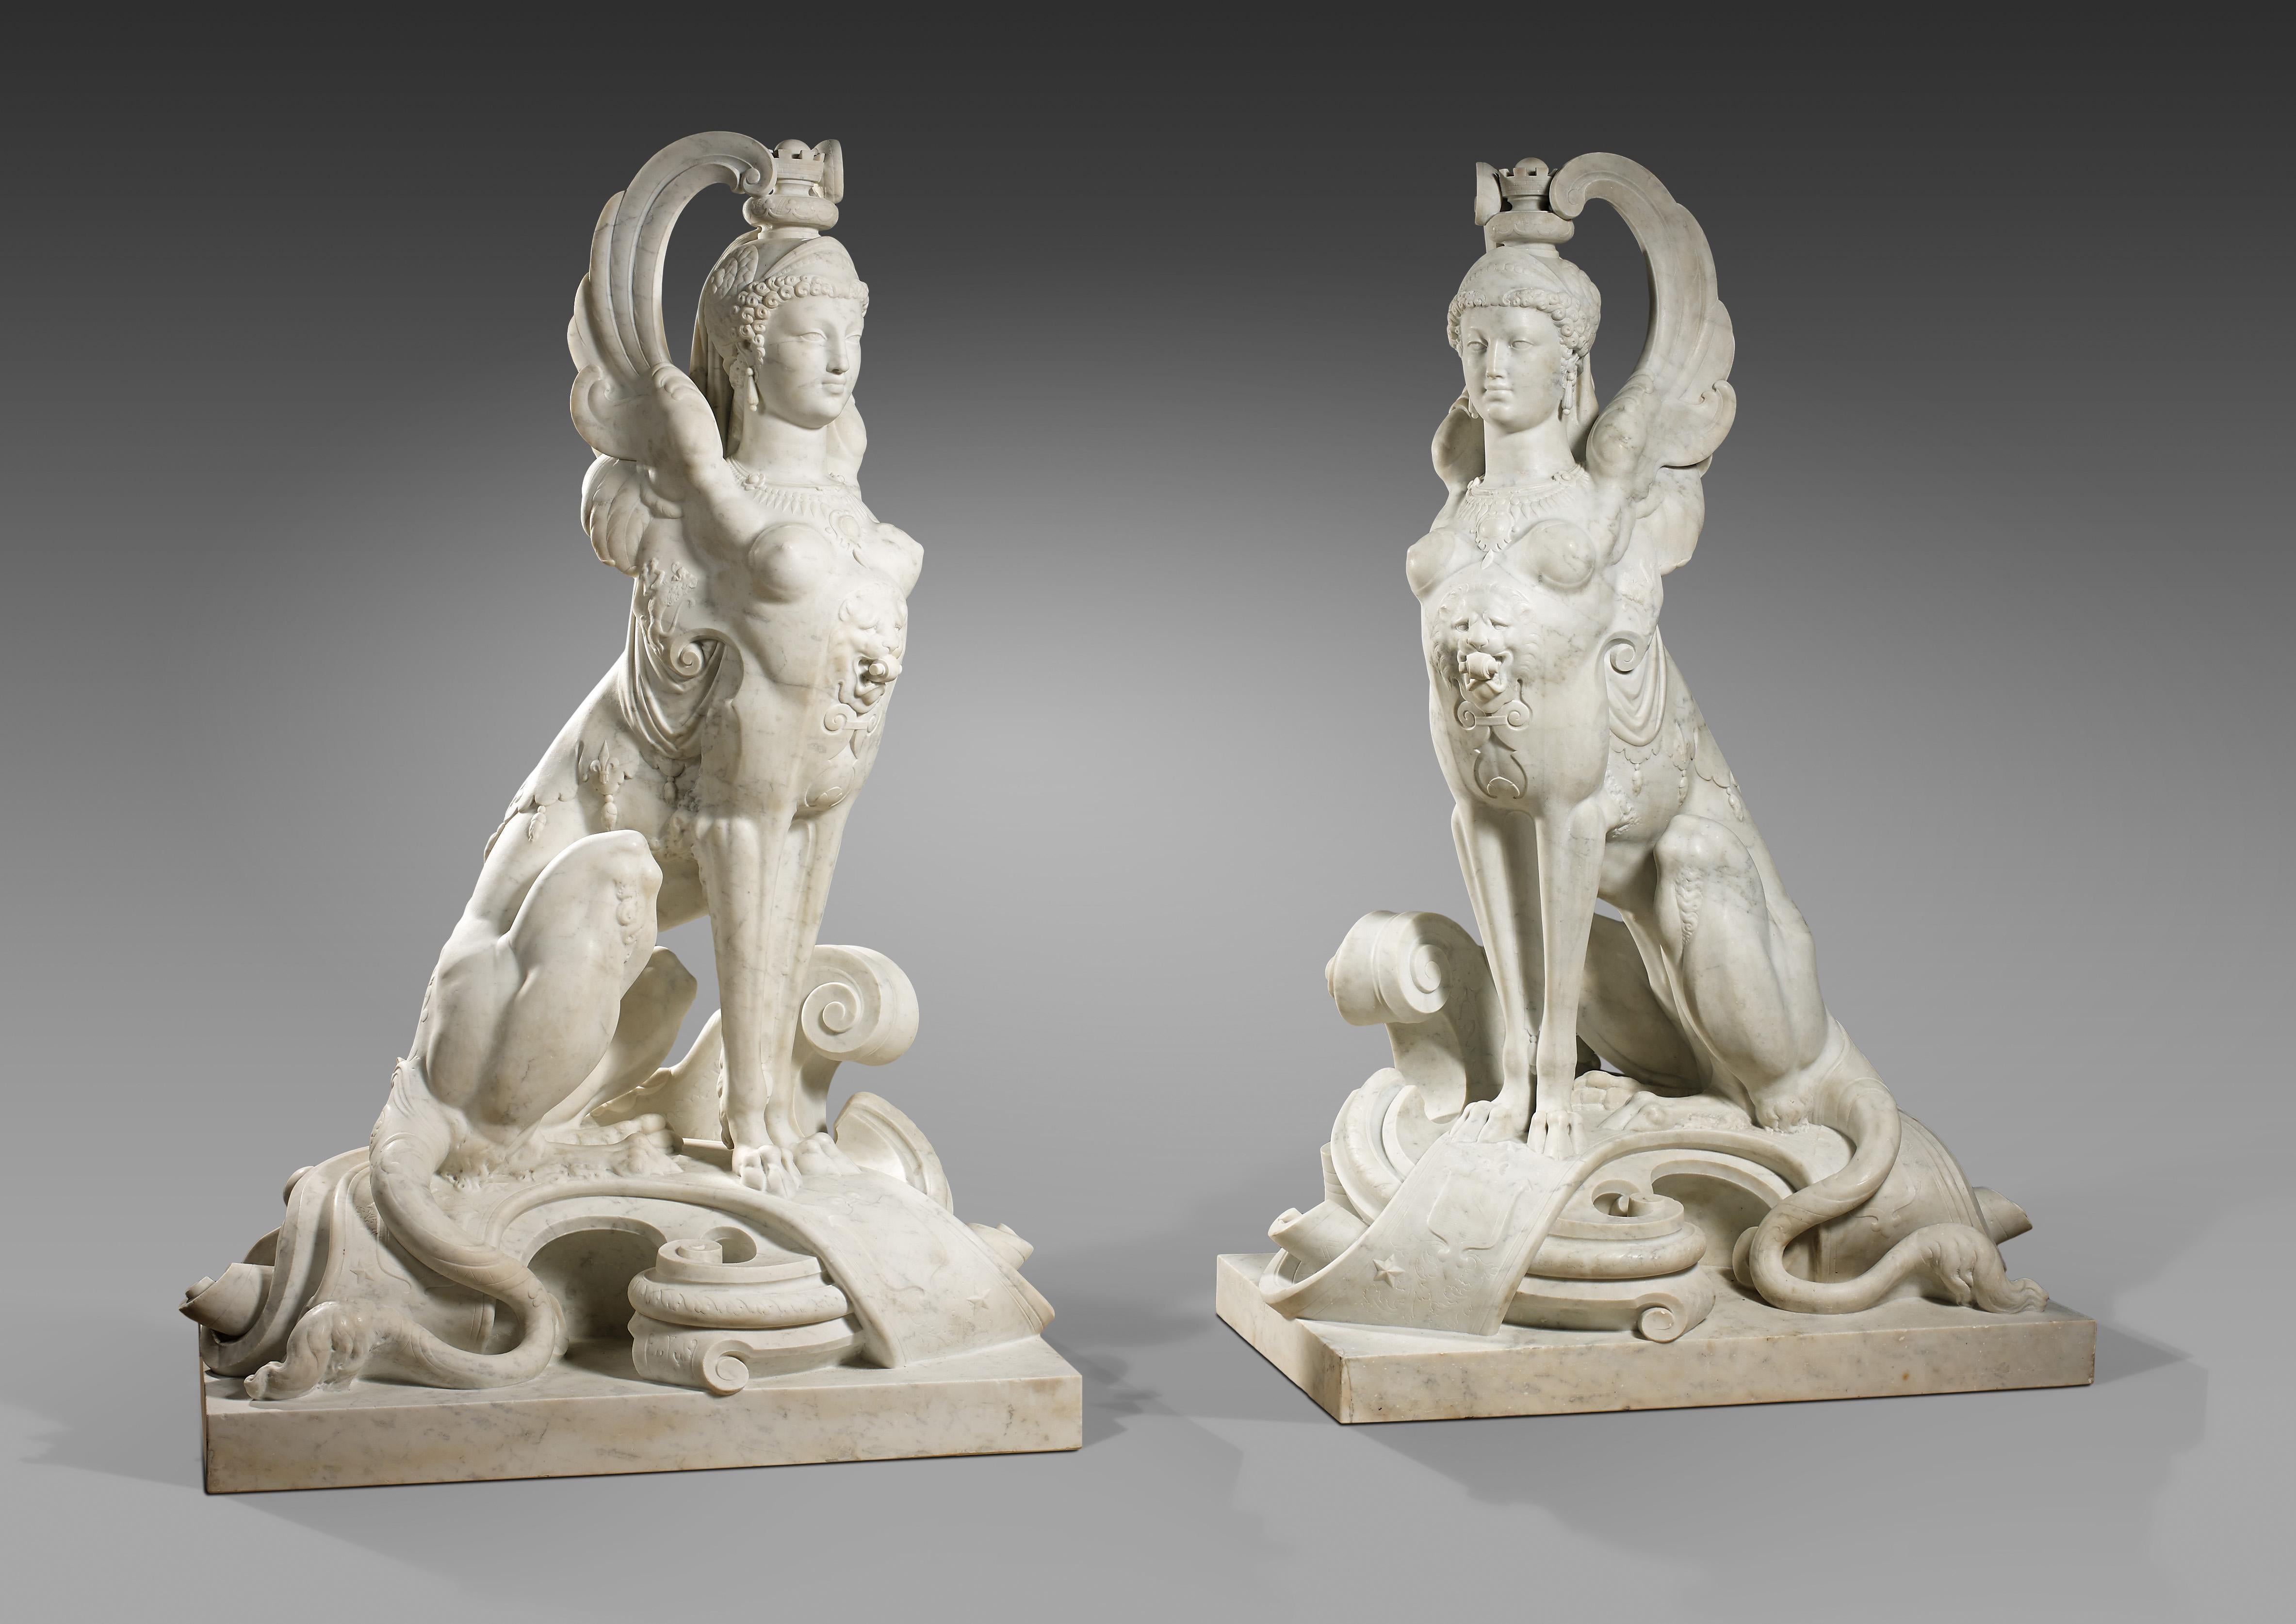 Signed E. Piat  and dated 1873

Exposed under the n°3097 at the Salon of 1874

Each of these sphinges, sculpted in white Carrara marble, stands on a serpentine base made of a large scroll and a phylactery decorated with coats of arms of fantasy.